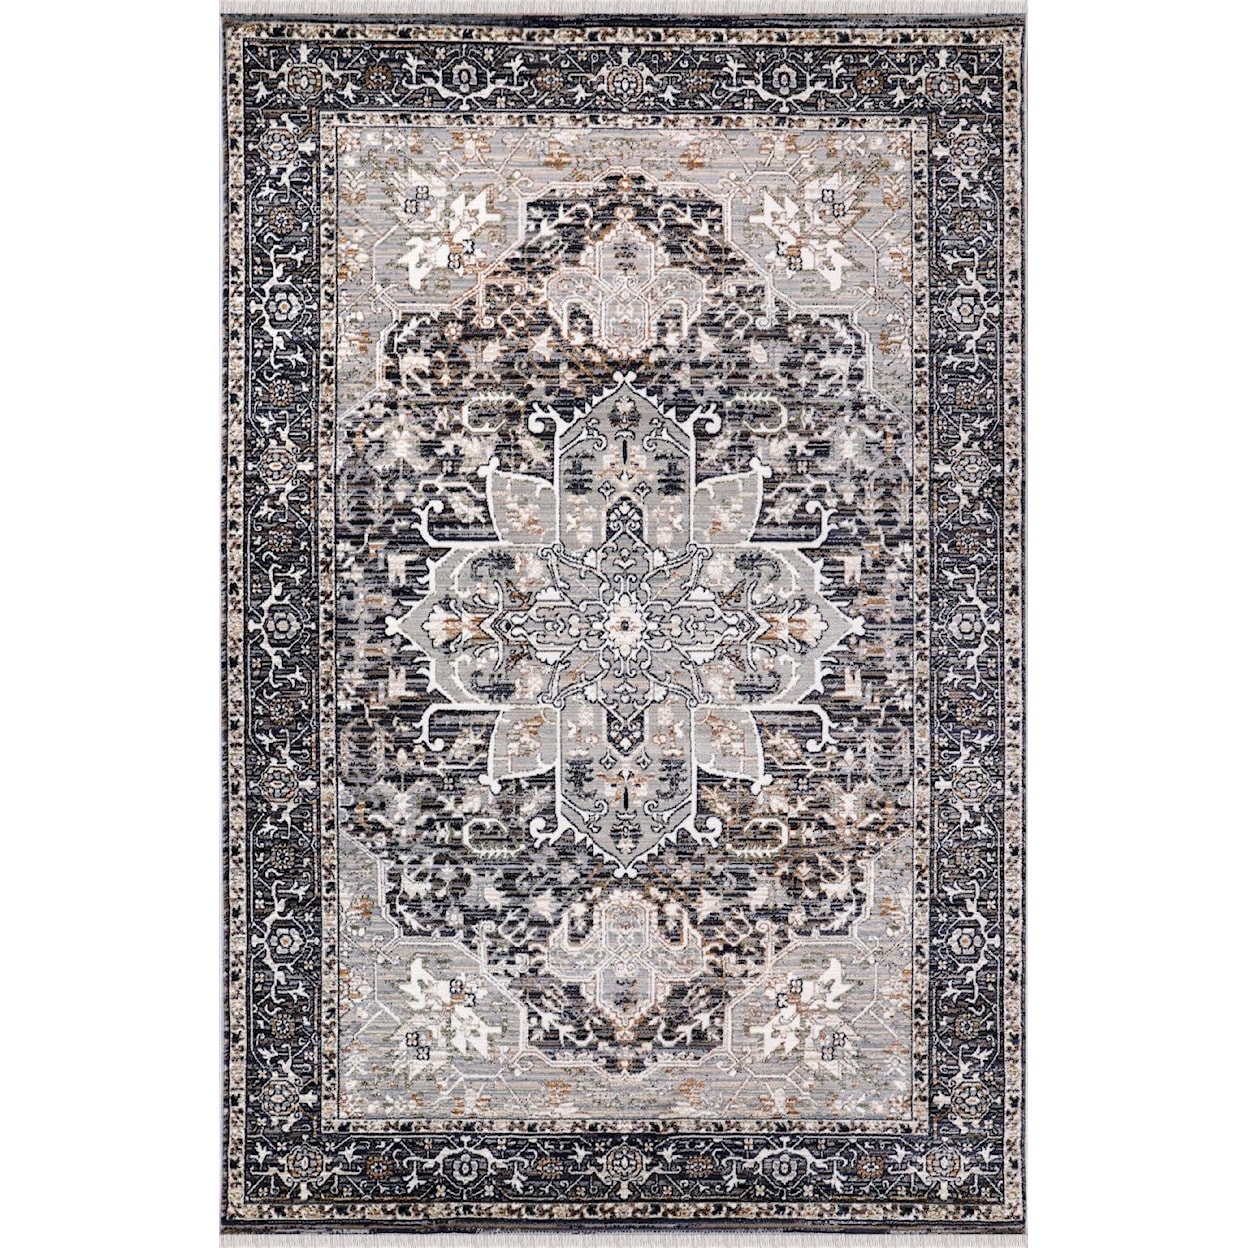 MDA Rugs Anna Collection ANNA 5X8 BLACK/BROWN AREA RUG |